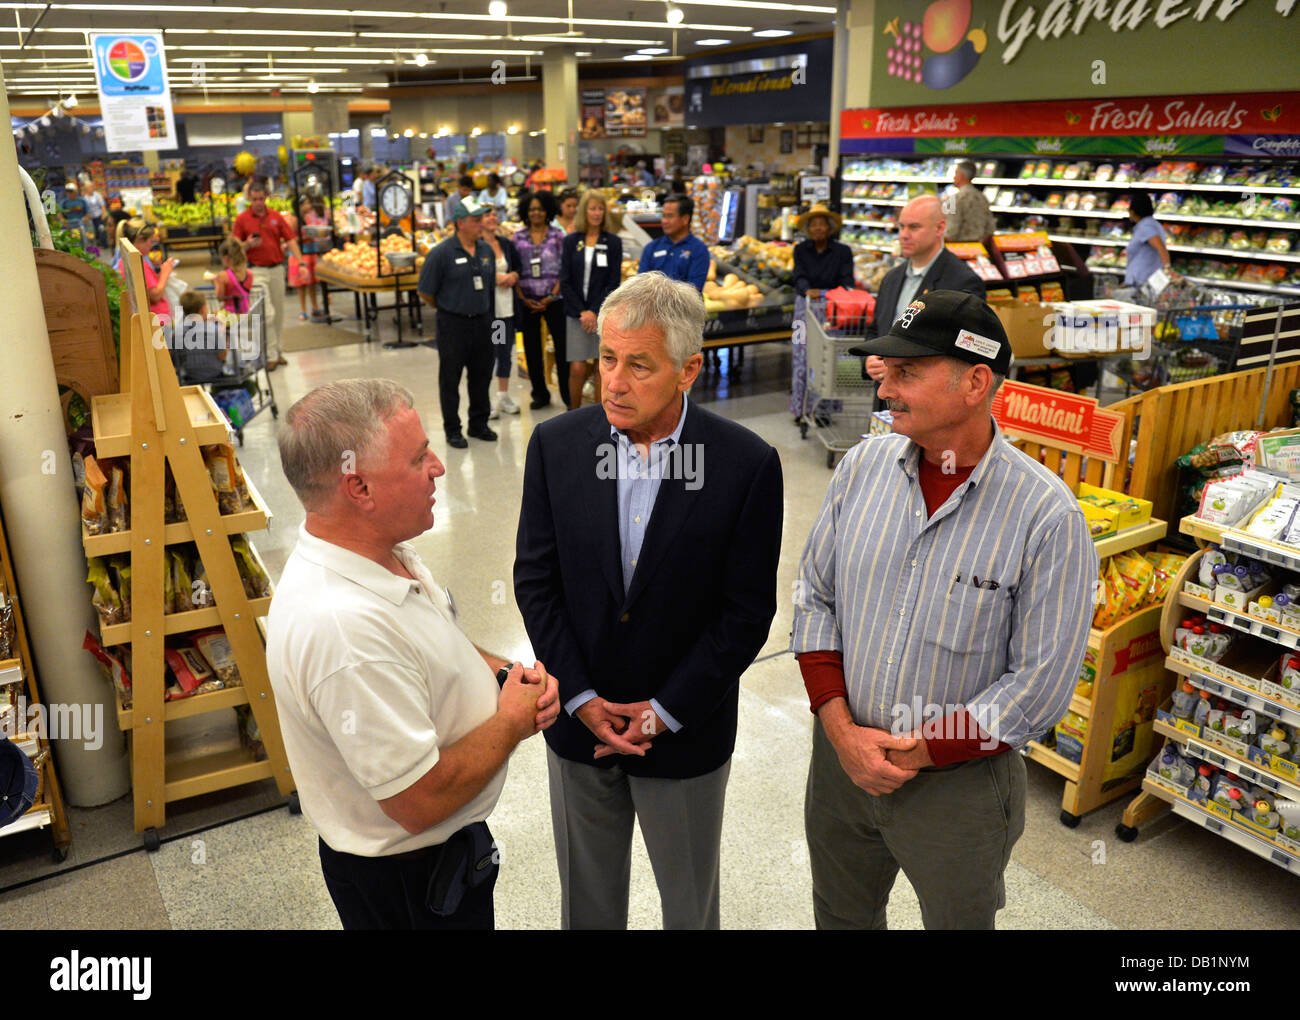 Secretary of Defense Chuck Hagel, center, tours the commissary at Naval Air Station Jacksonville, Fla., July 16, 2013, with store director Larry Bentley, left, and meat department manager John Crayon. Hagel was on a three-day trip to visit several install Stock Photo